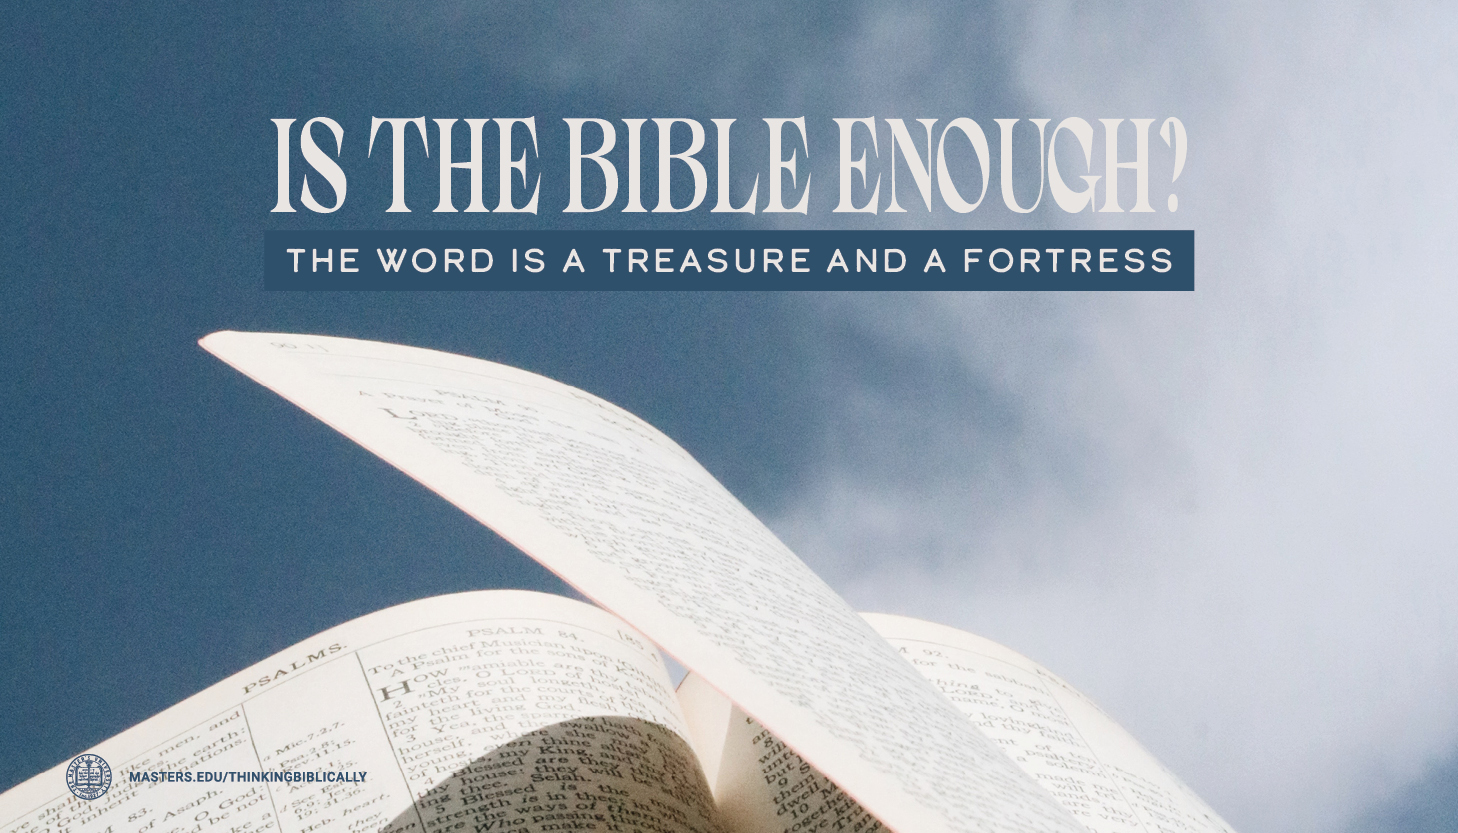 The Word is a Treasure and a Fortress